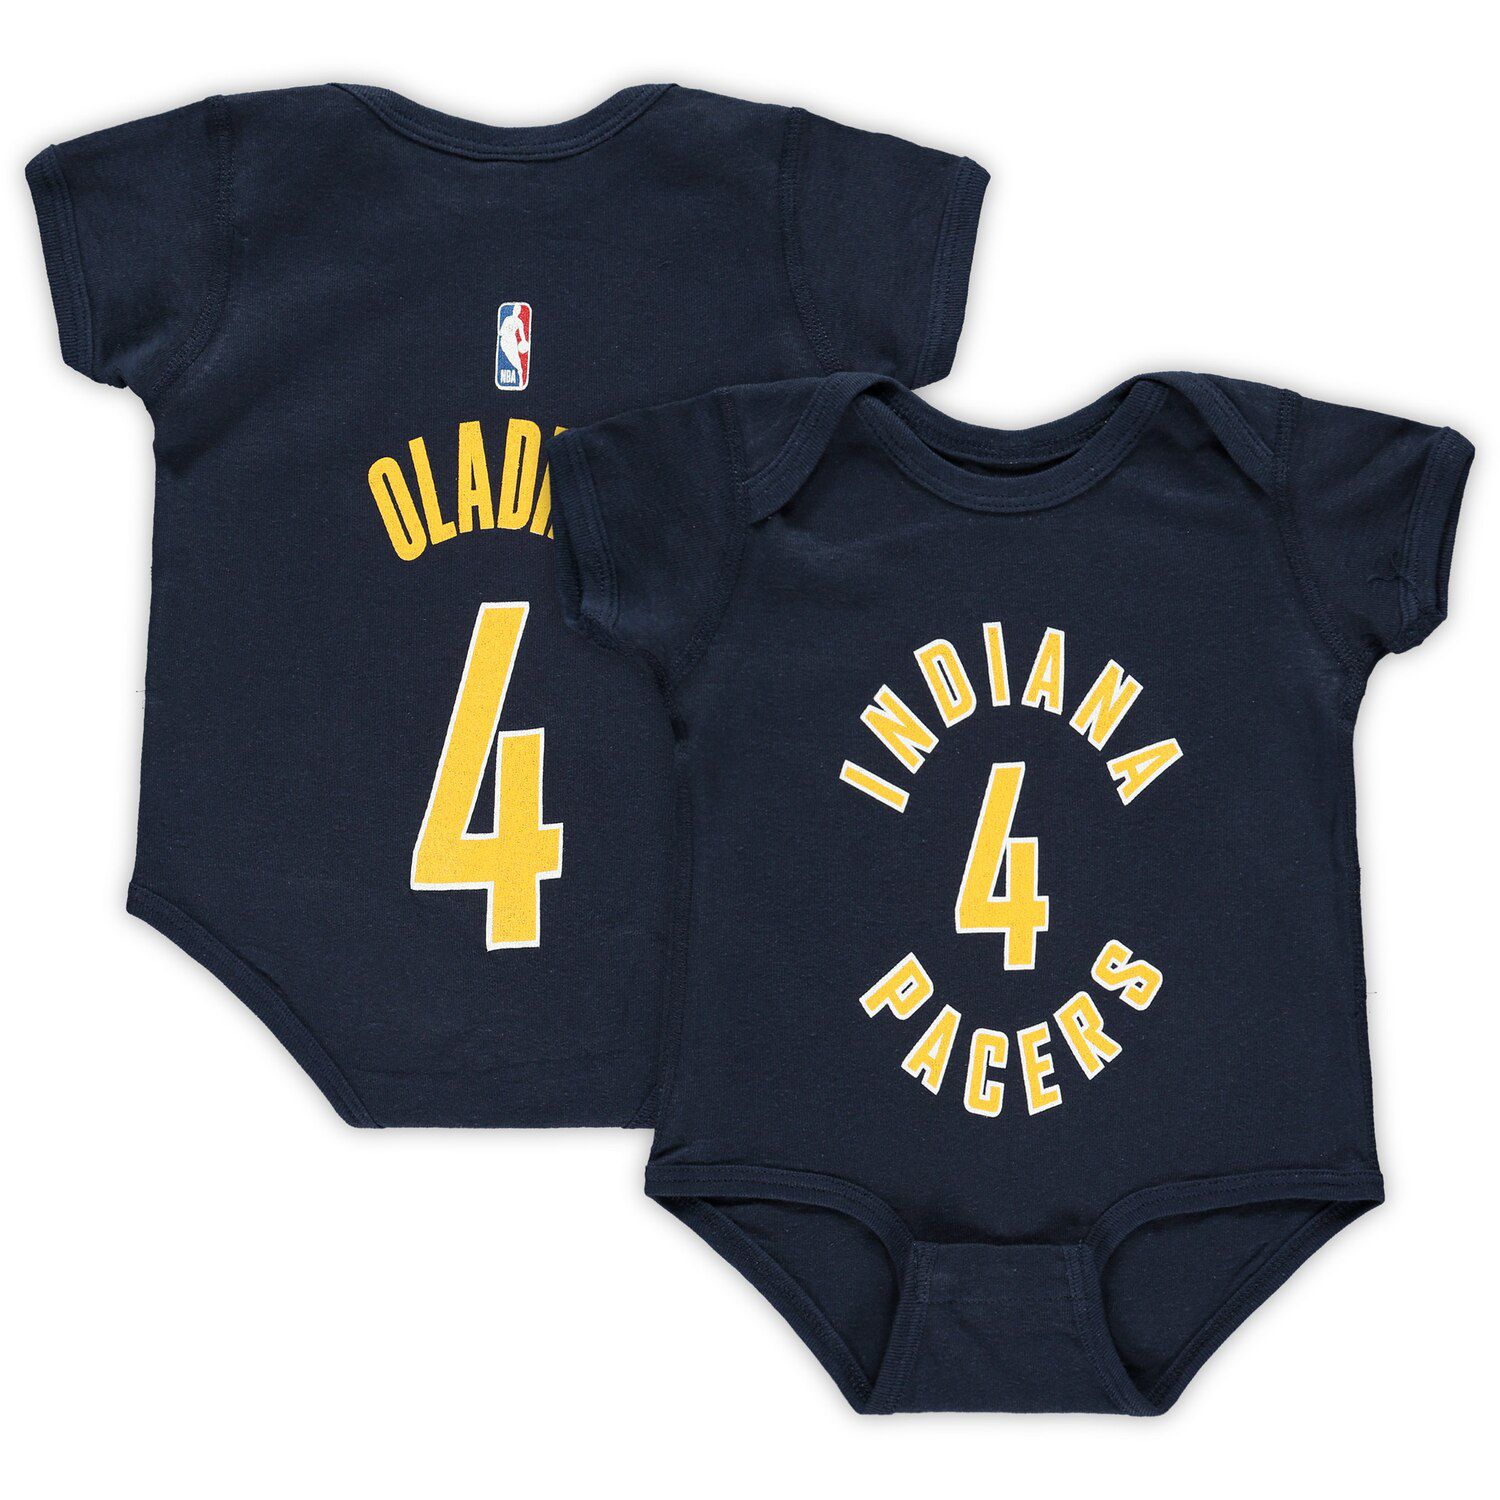 indiana pacers polo shirt